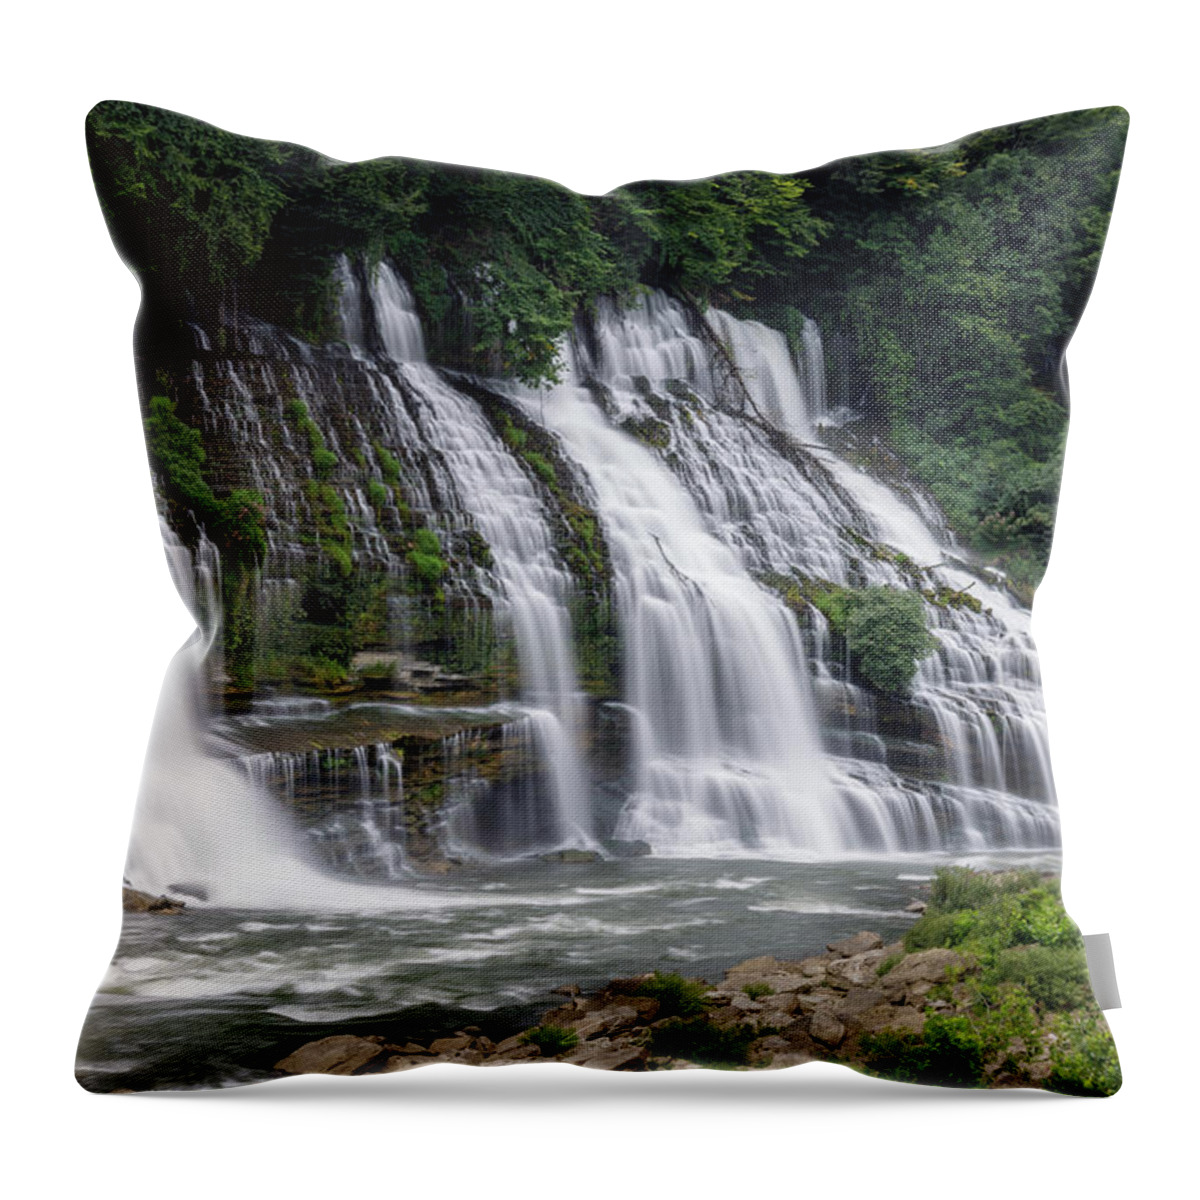  Throw Pillow featuring the photograph Twin Falls by William Boggs